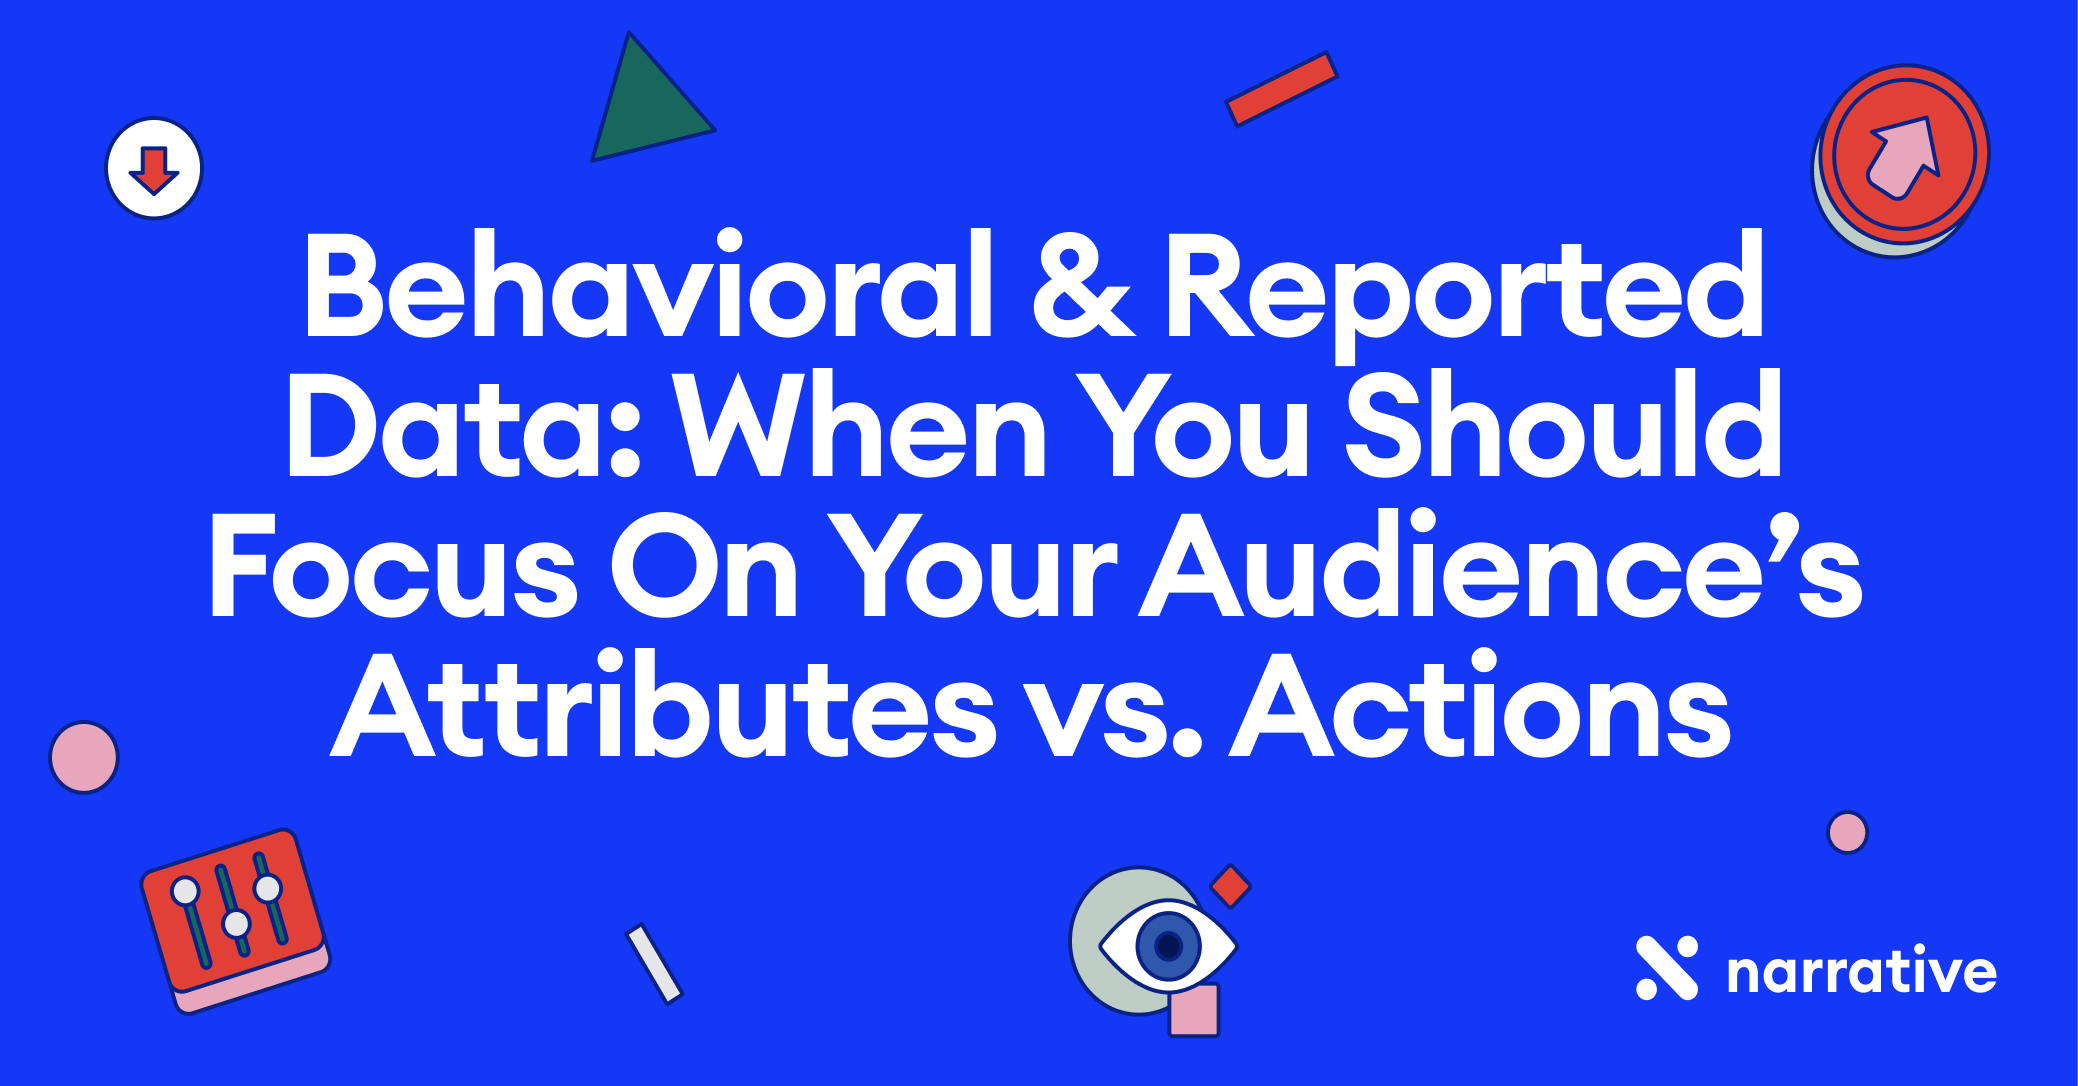 Behavioral & Reported Data: When You Should Focus On Your Audience’s Attributes vs. Actions